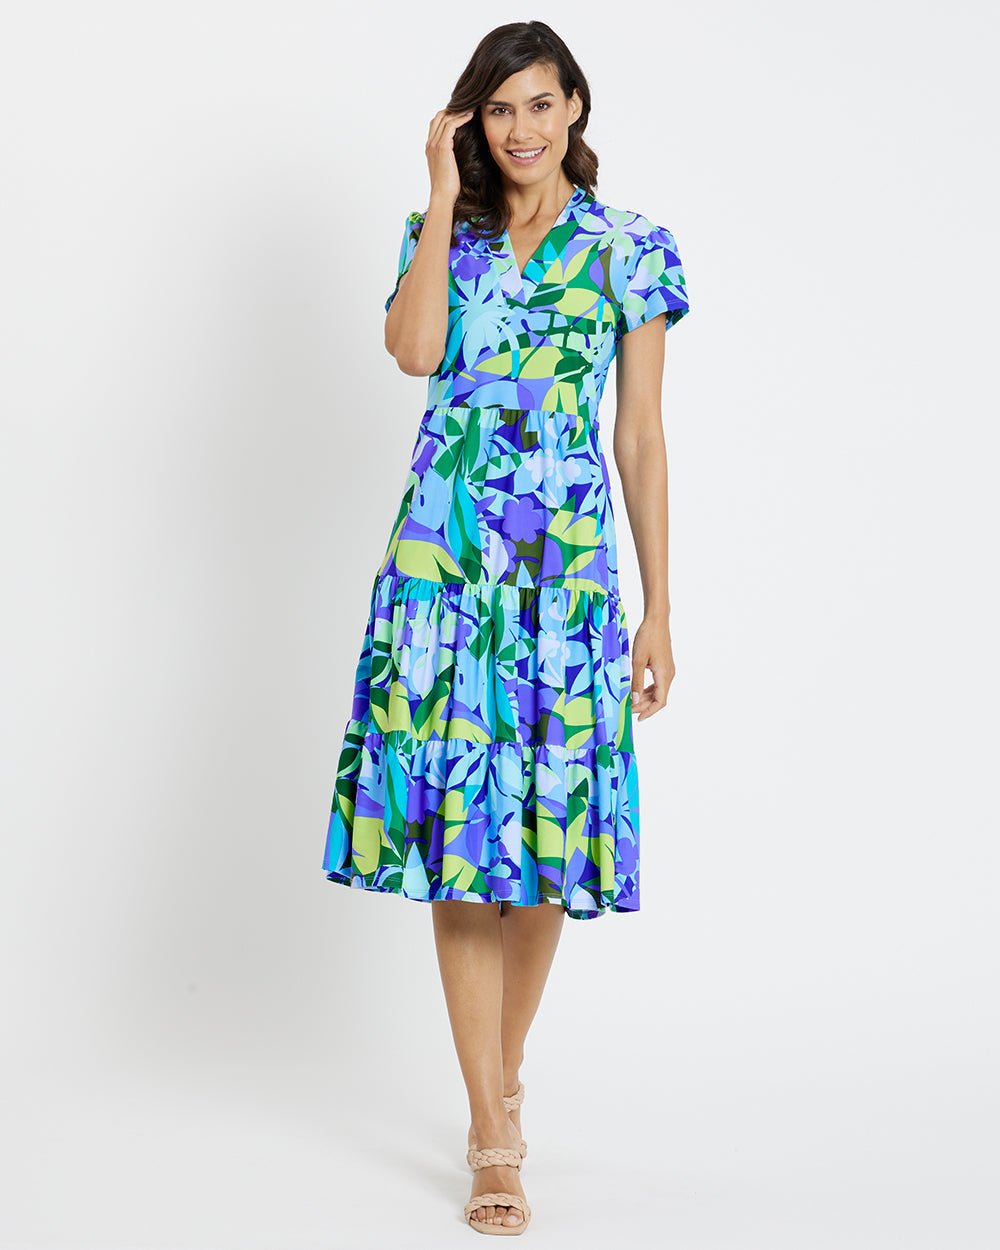 Jude Connally - Libby Kaleidoscope Floral Dress: Iris - Shorely Chic Boutique